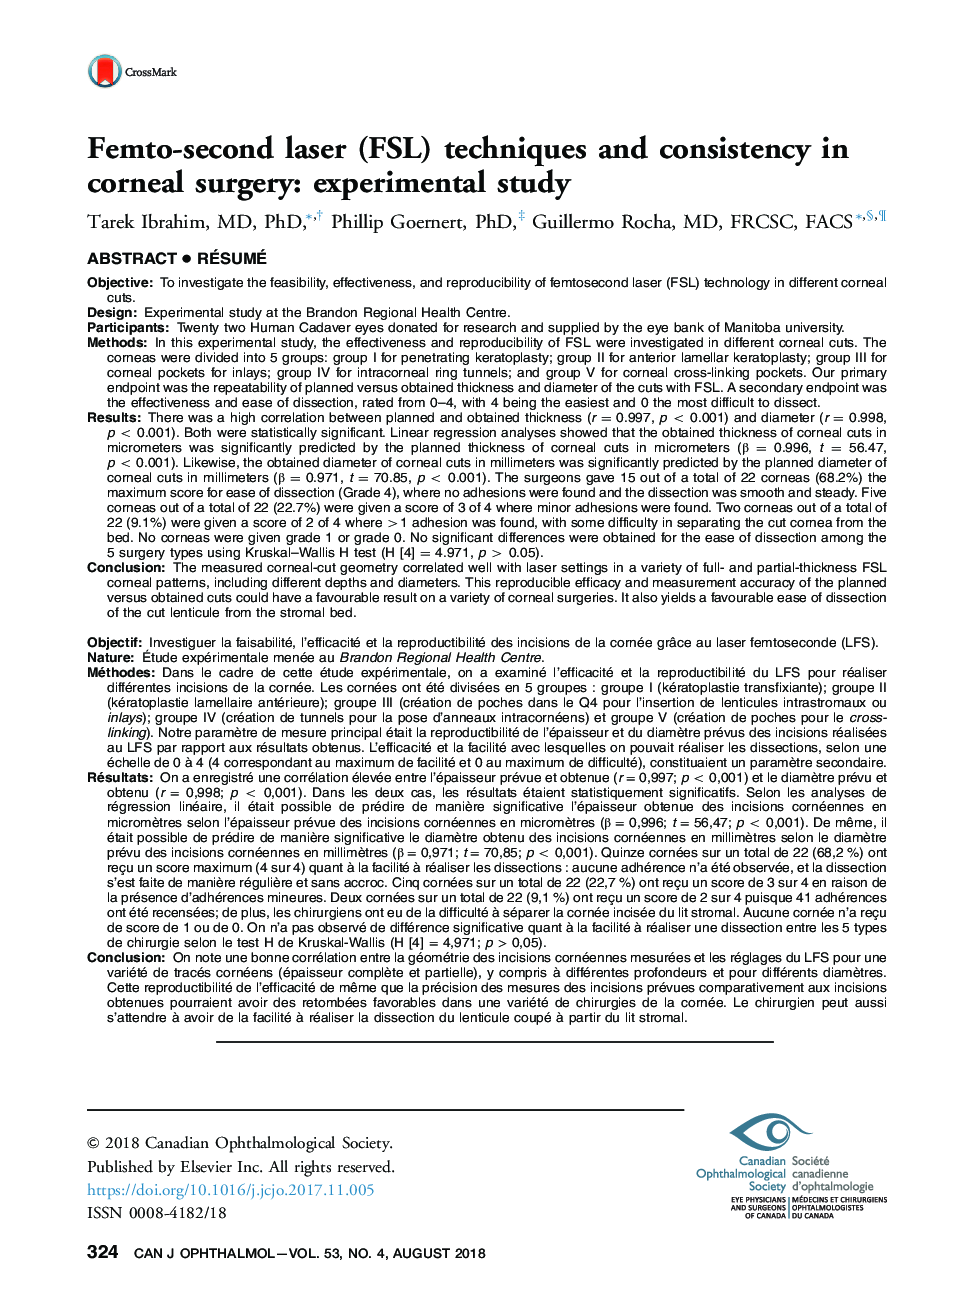 Femto-second laser (FSL) techniques and consistency in corneal surgery: experimental study